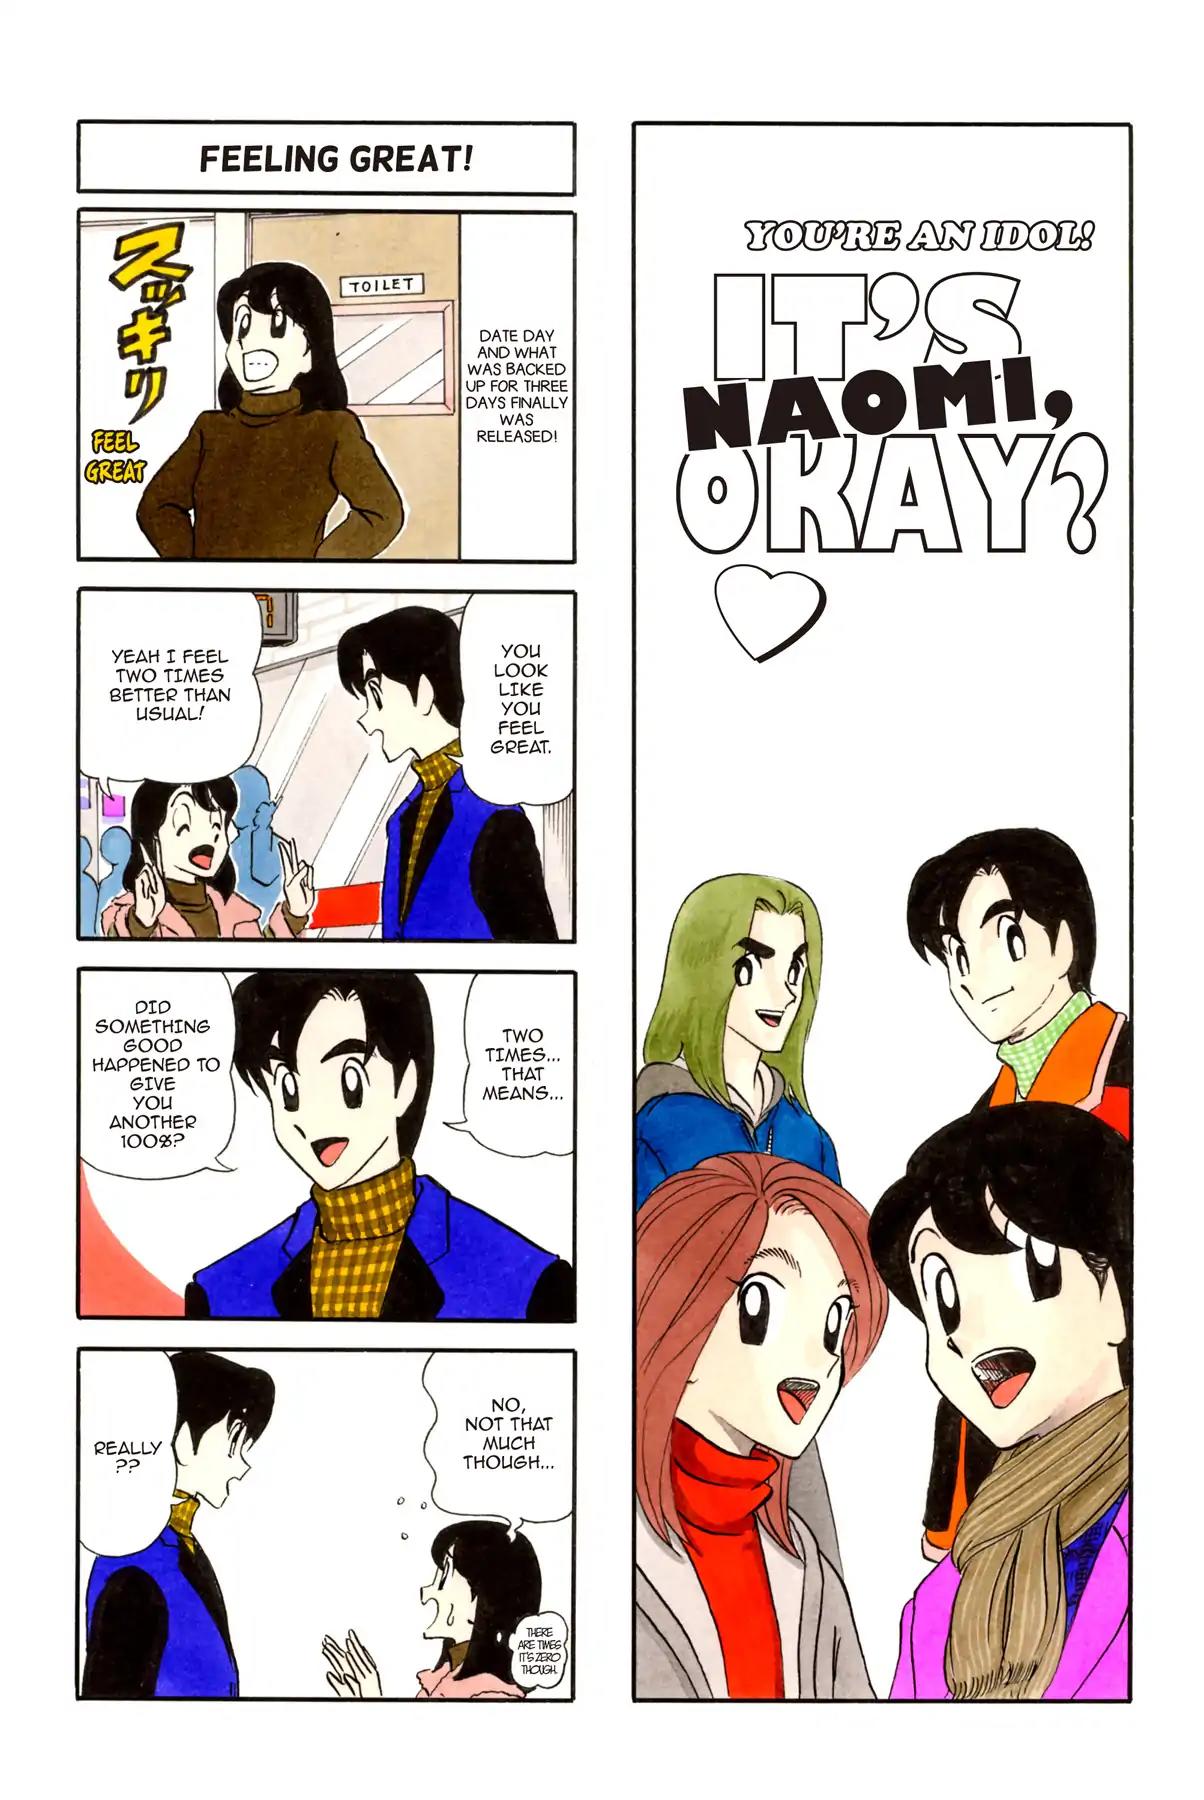 It's Naomi, Okay? After 16 Vol 1 Chapter 17